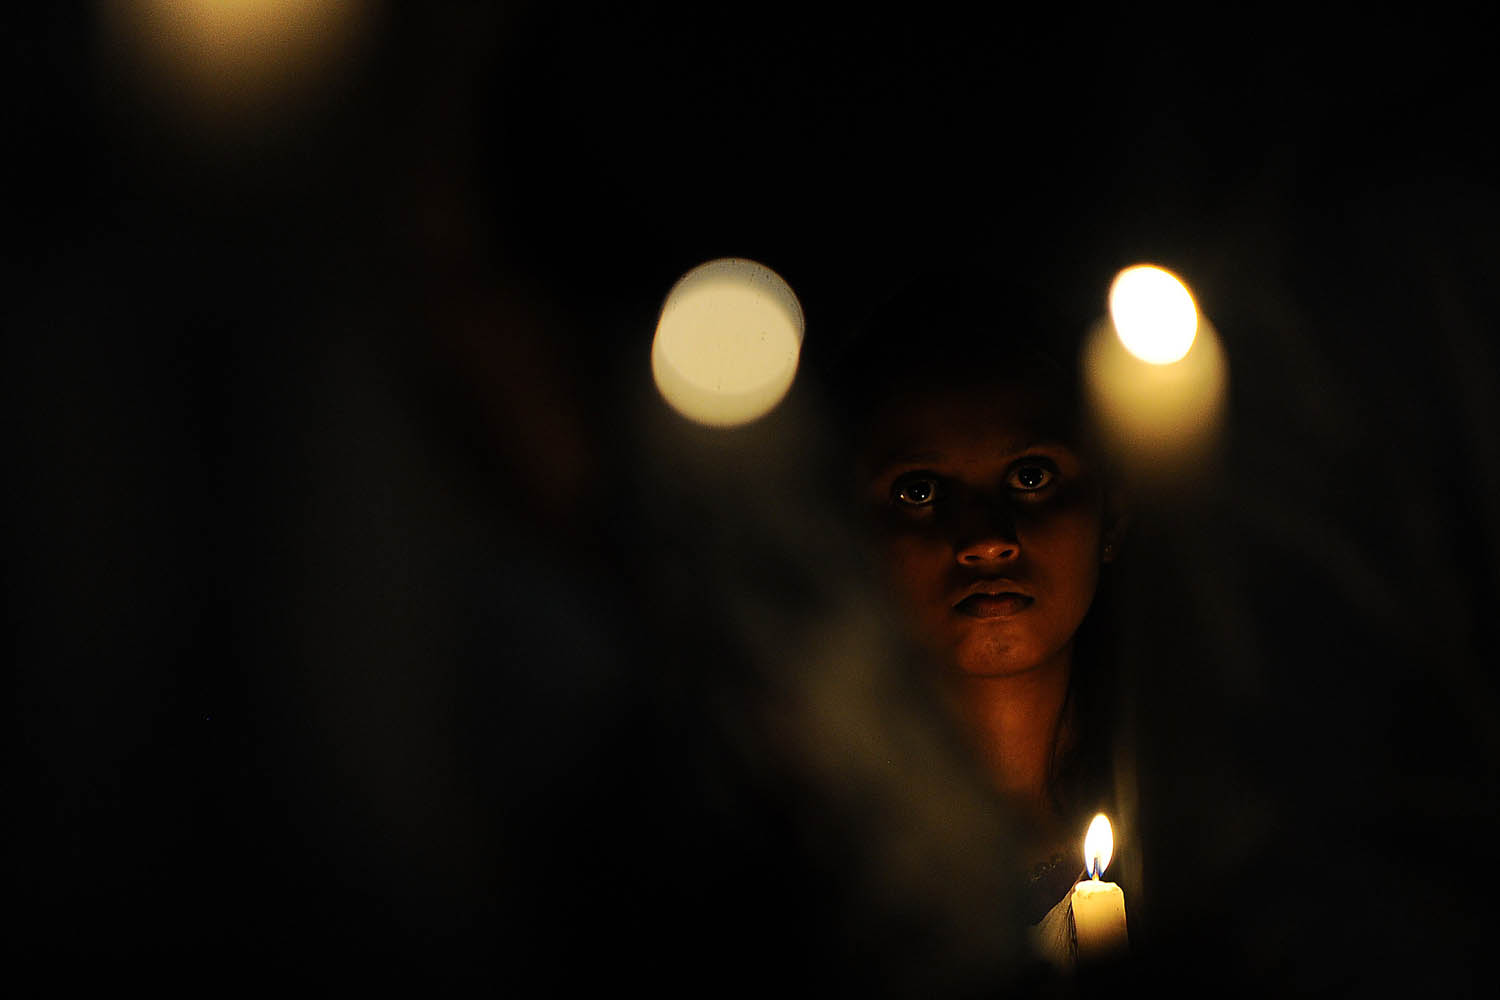 Jan. 31, 2014. Sri Lankan Central Bank employees hold candles as they attend a memorial in Colombo for the 91 people killed when Tamil Tiger separatists carried out a suicide truck-bomb attack against the Central Bank of Sri Lanka building in downtown Colombo 18 years ago.